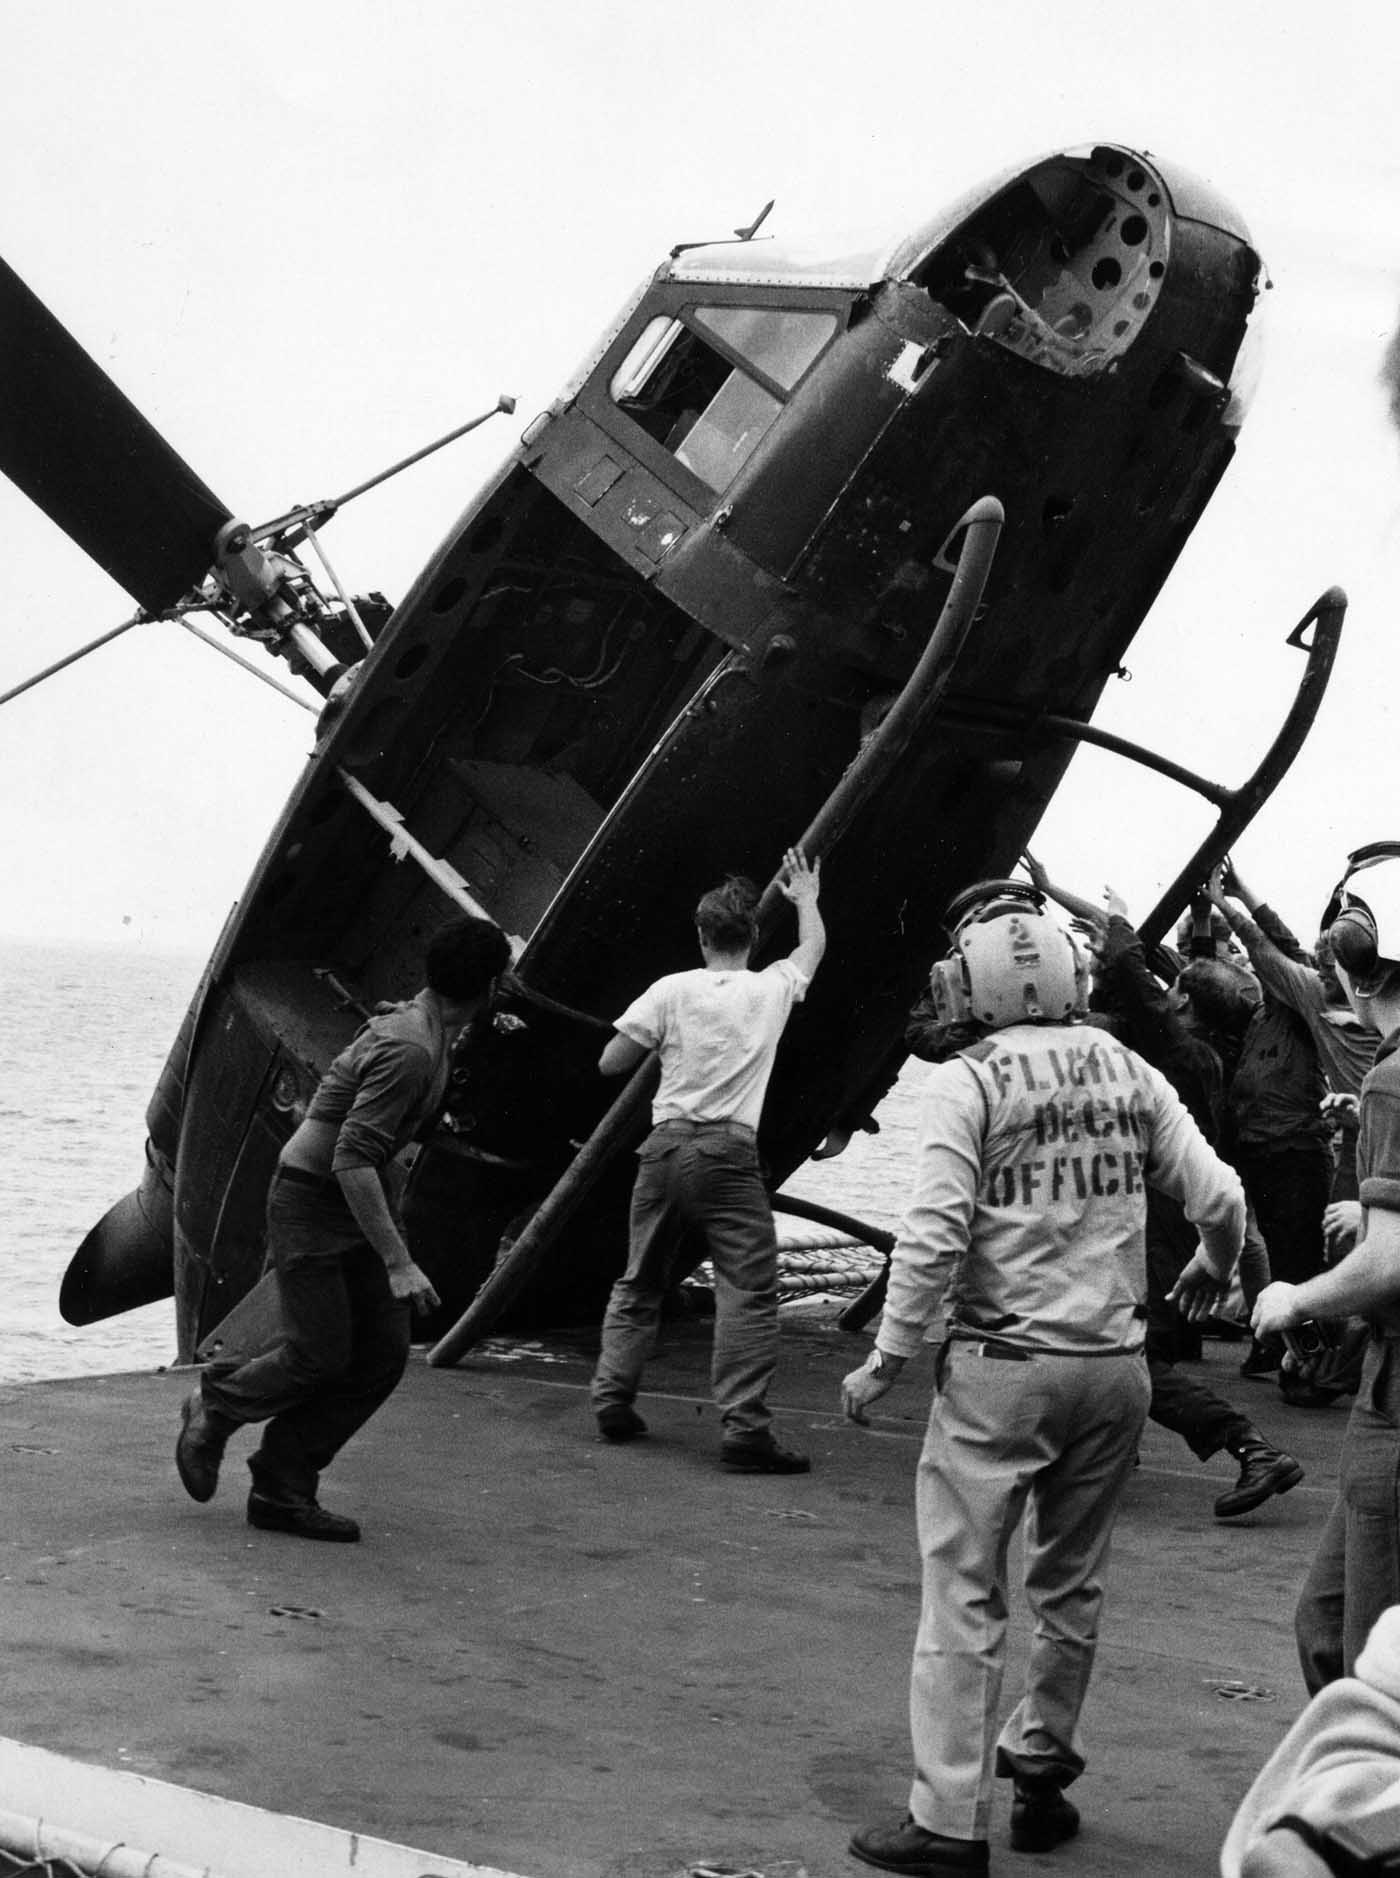 A South Vietnamese helicopter is pushed overboard from USS Okinawa to clear deck space for more incoming helicopters.